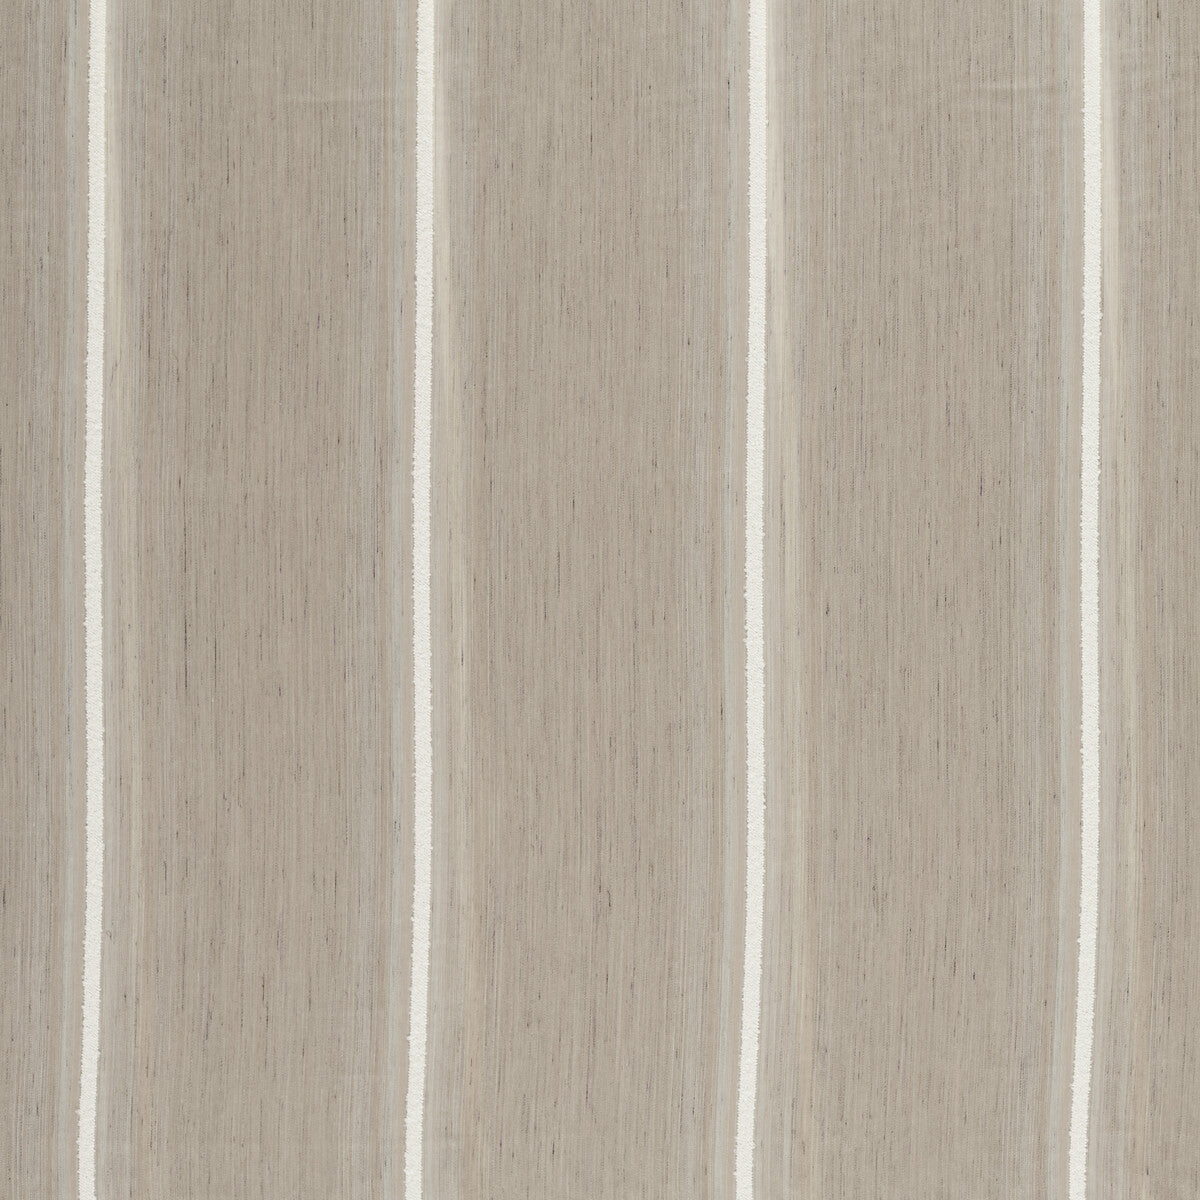 Jonas fabric in mocha color - pattern F1625/03.CAC.0 - by Clarke And Clarke in the Clarke And Clarke Vardo Sheers collection